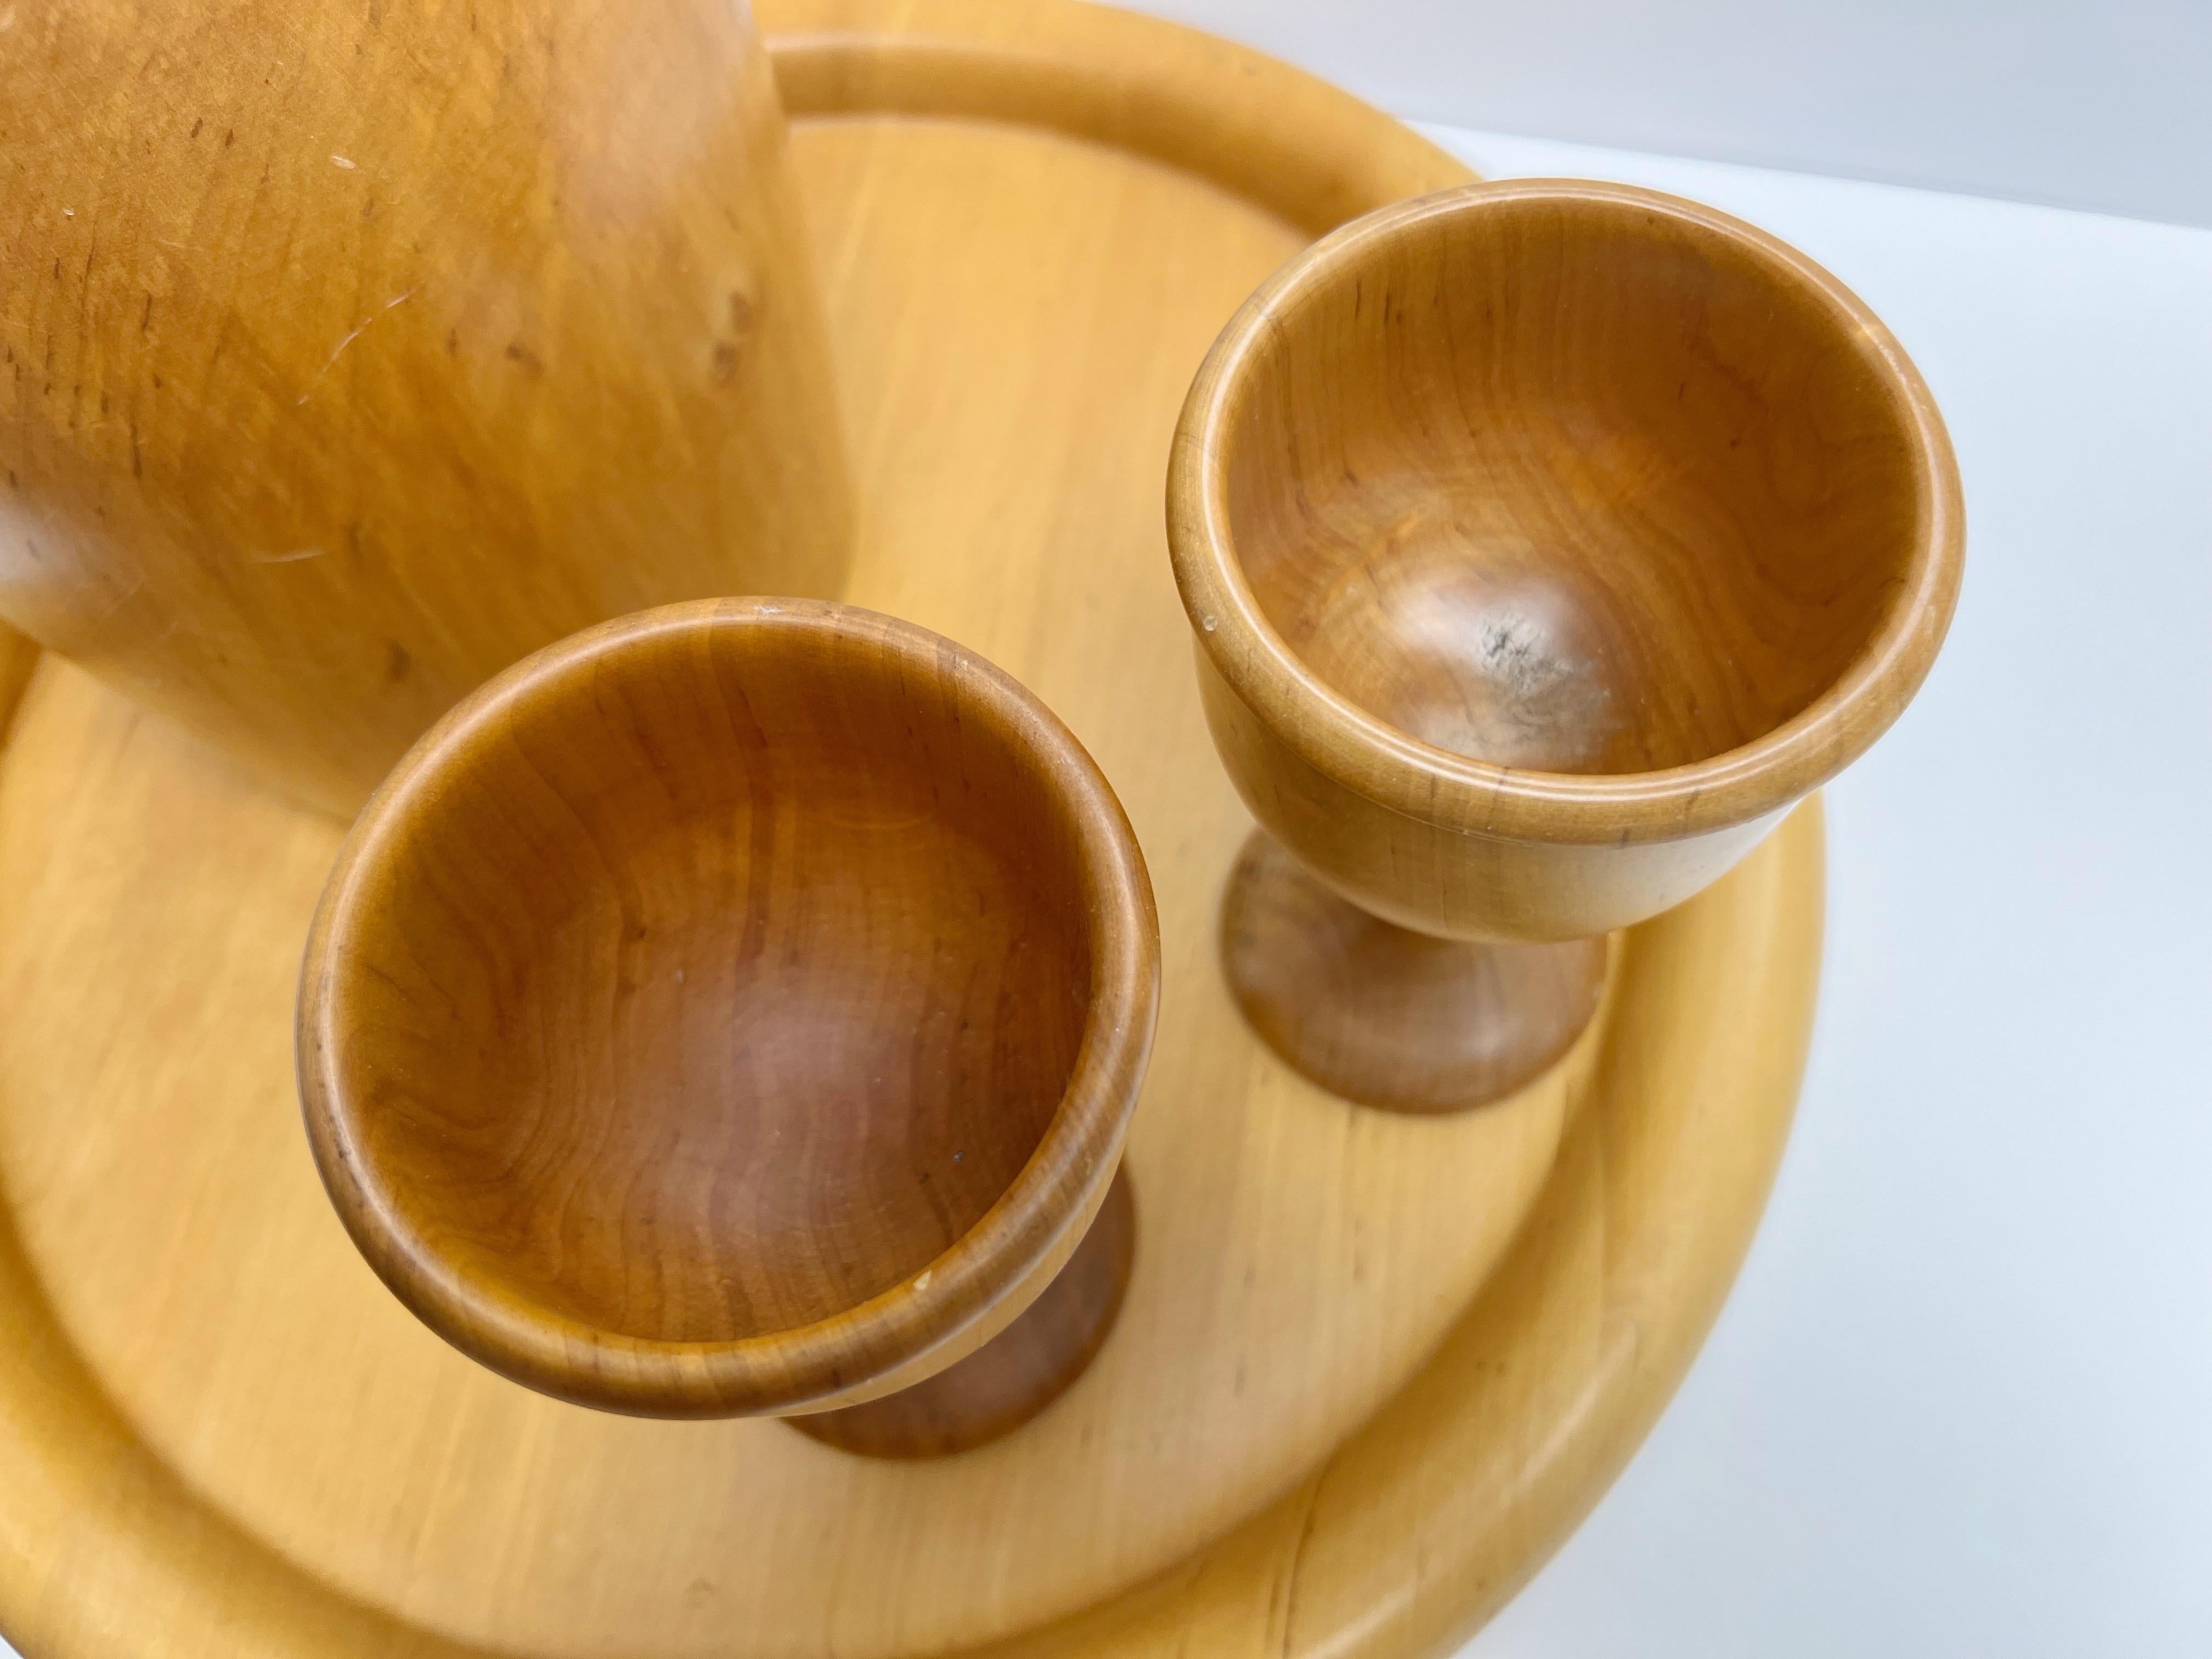 A carved set that includes a tray, a thermos Jug with cork stopper, and 2 cups,